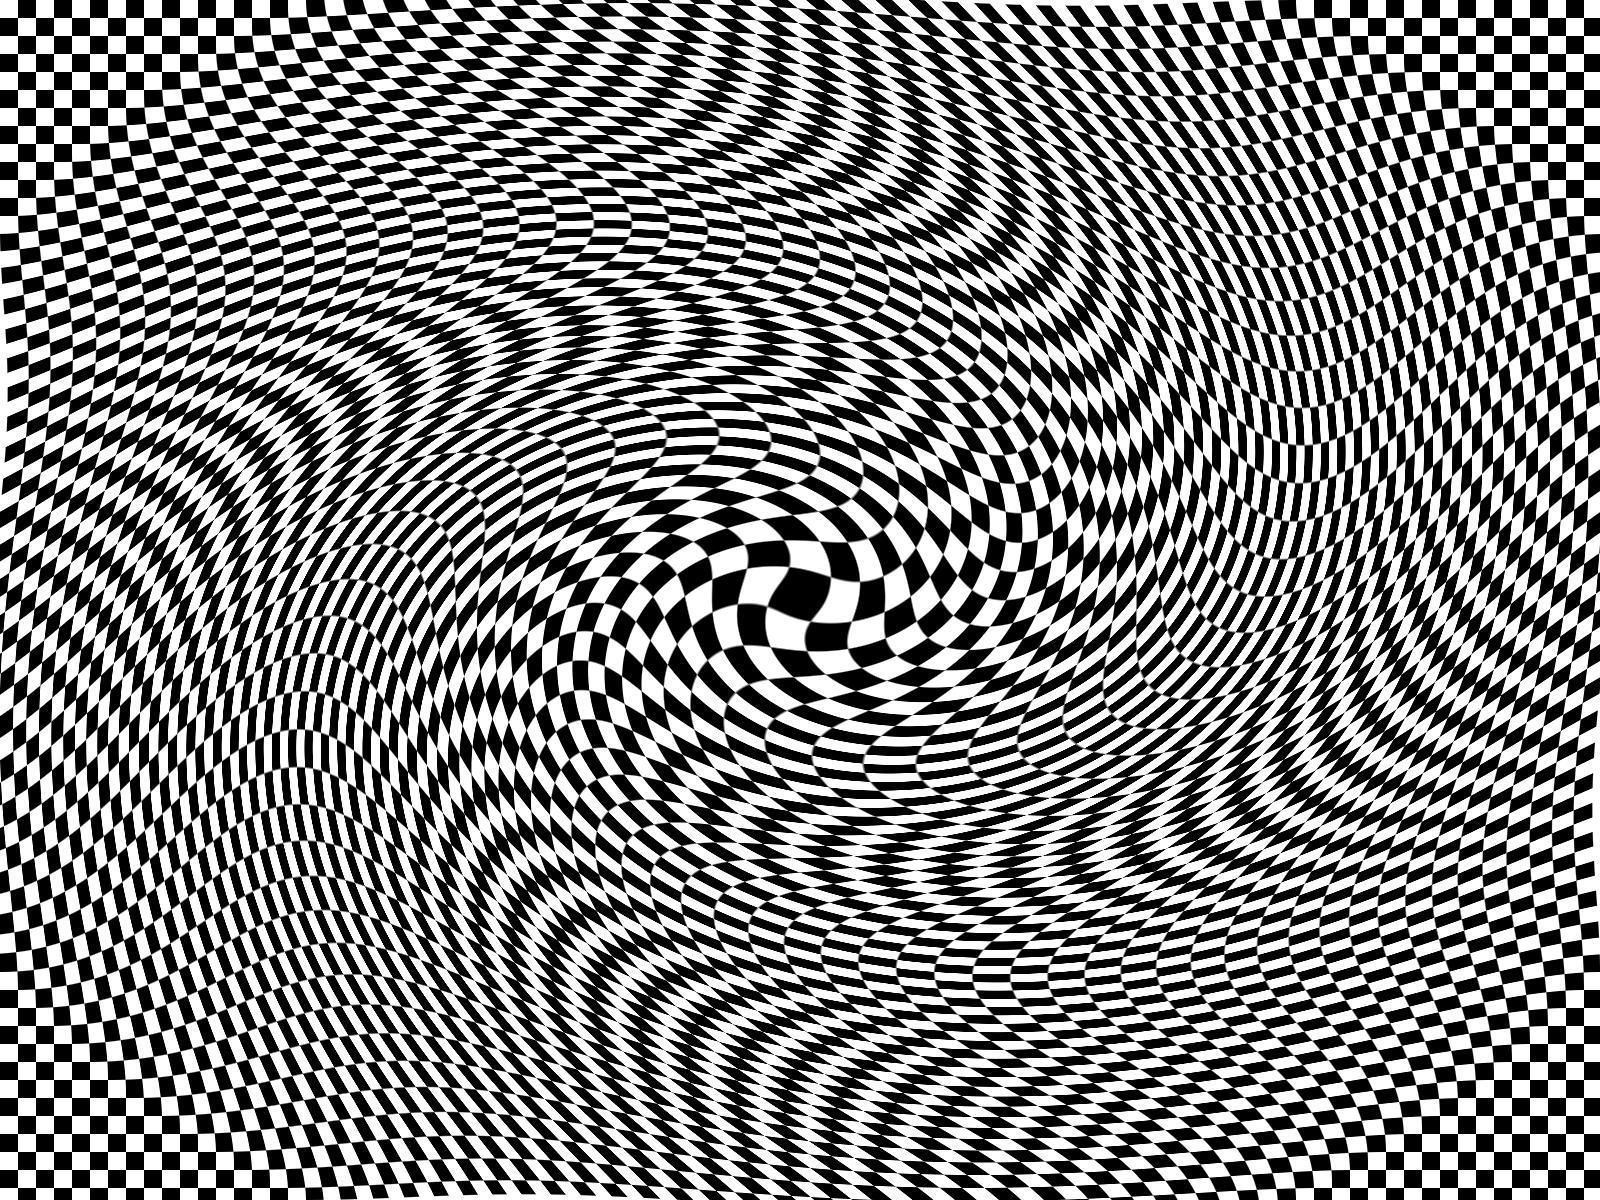 Download Optical Illusion Wallpaper 3681 1600x1200 px High ...